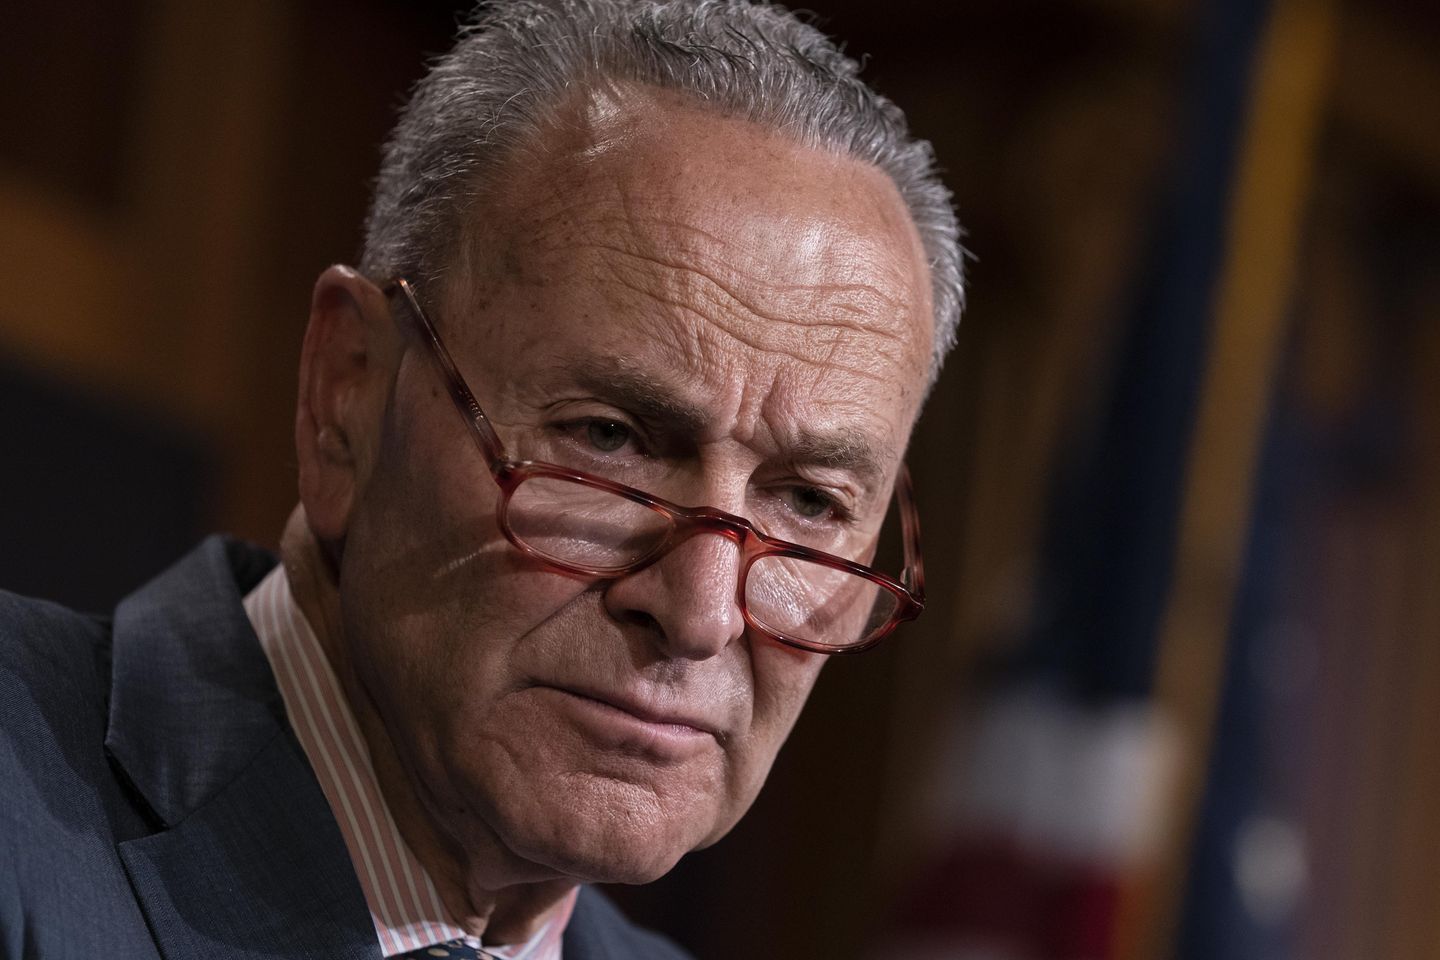 Charles E. Schumer blasts Kevin McCarthy, GOP after tense House speaker election